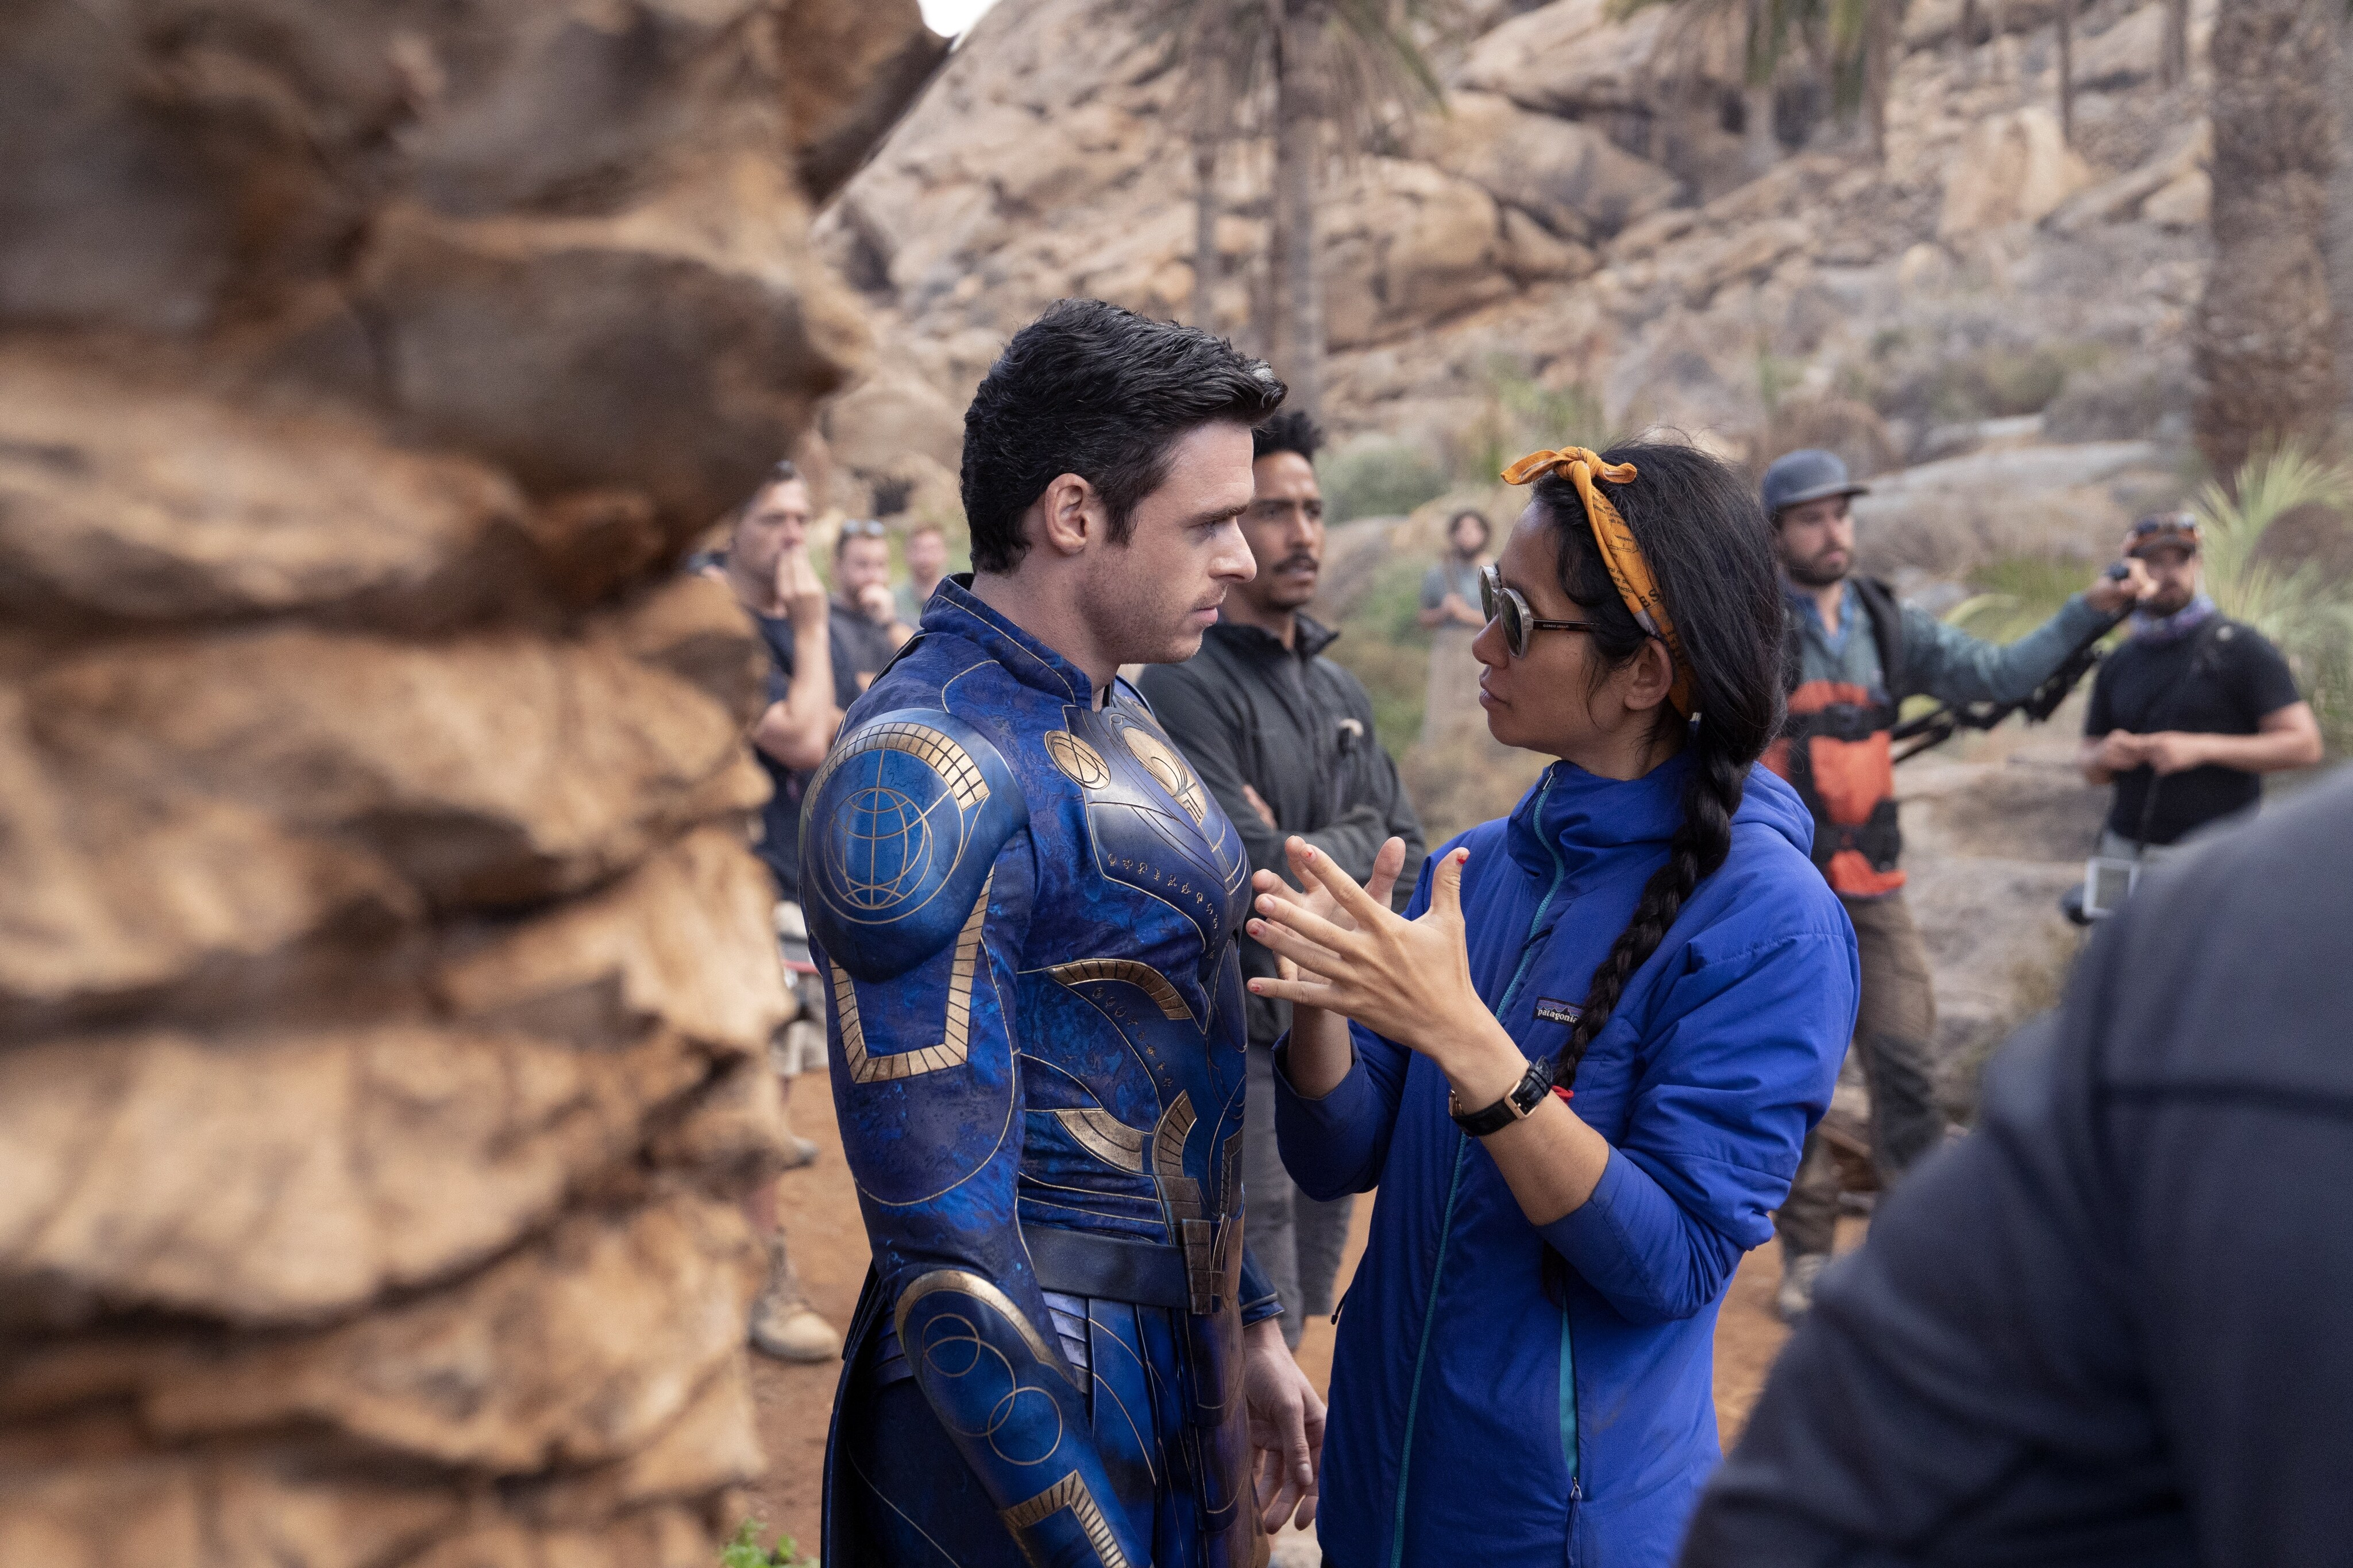 Chloé Zhao directs Richard Madden as Ikaris in Marvel Studios' Eternals. The background is a desert canyon and there are other crew members visible in the background. Madden wears a supersuit.